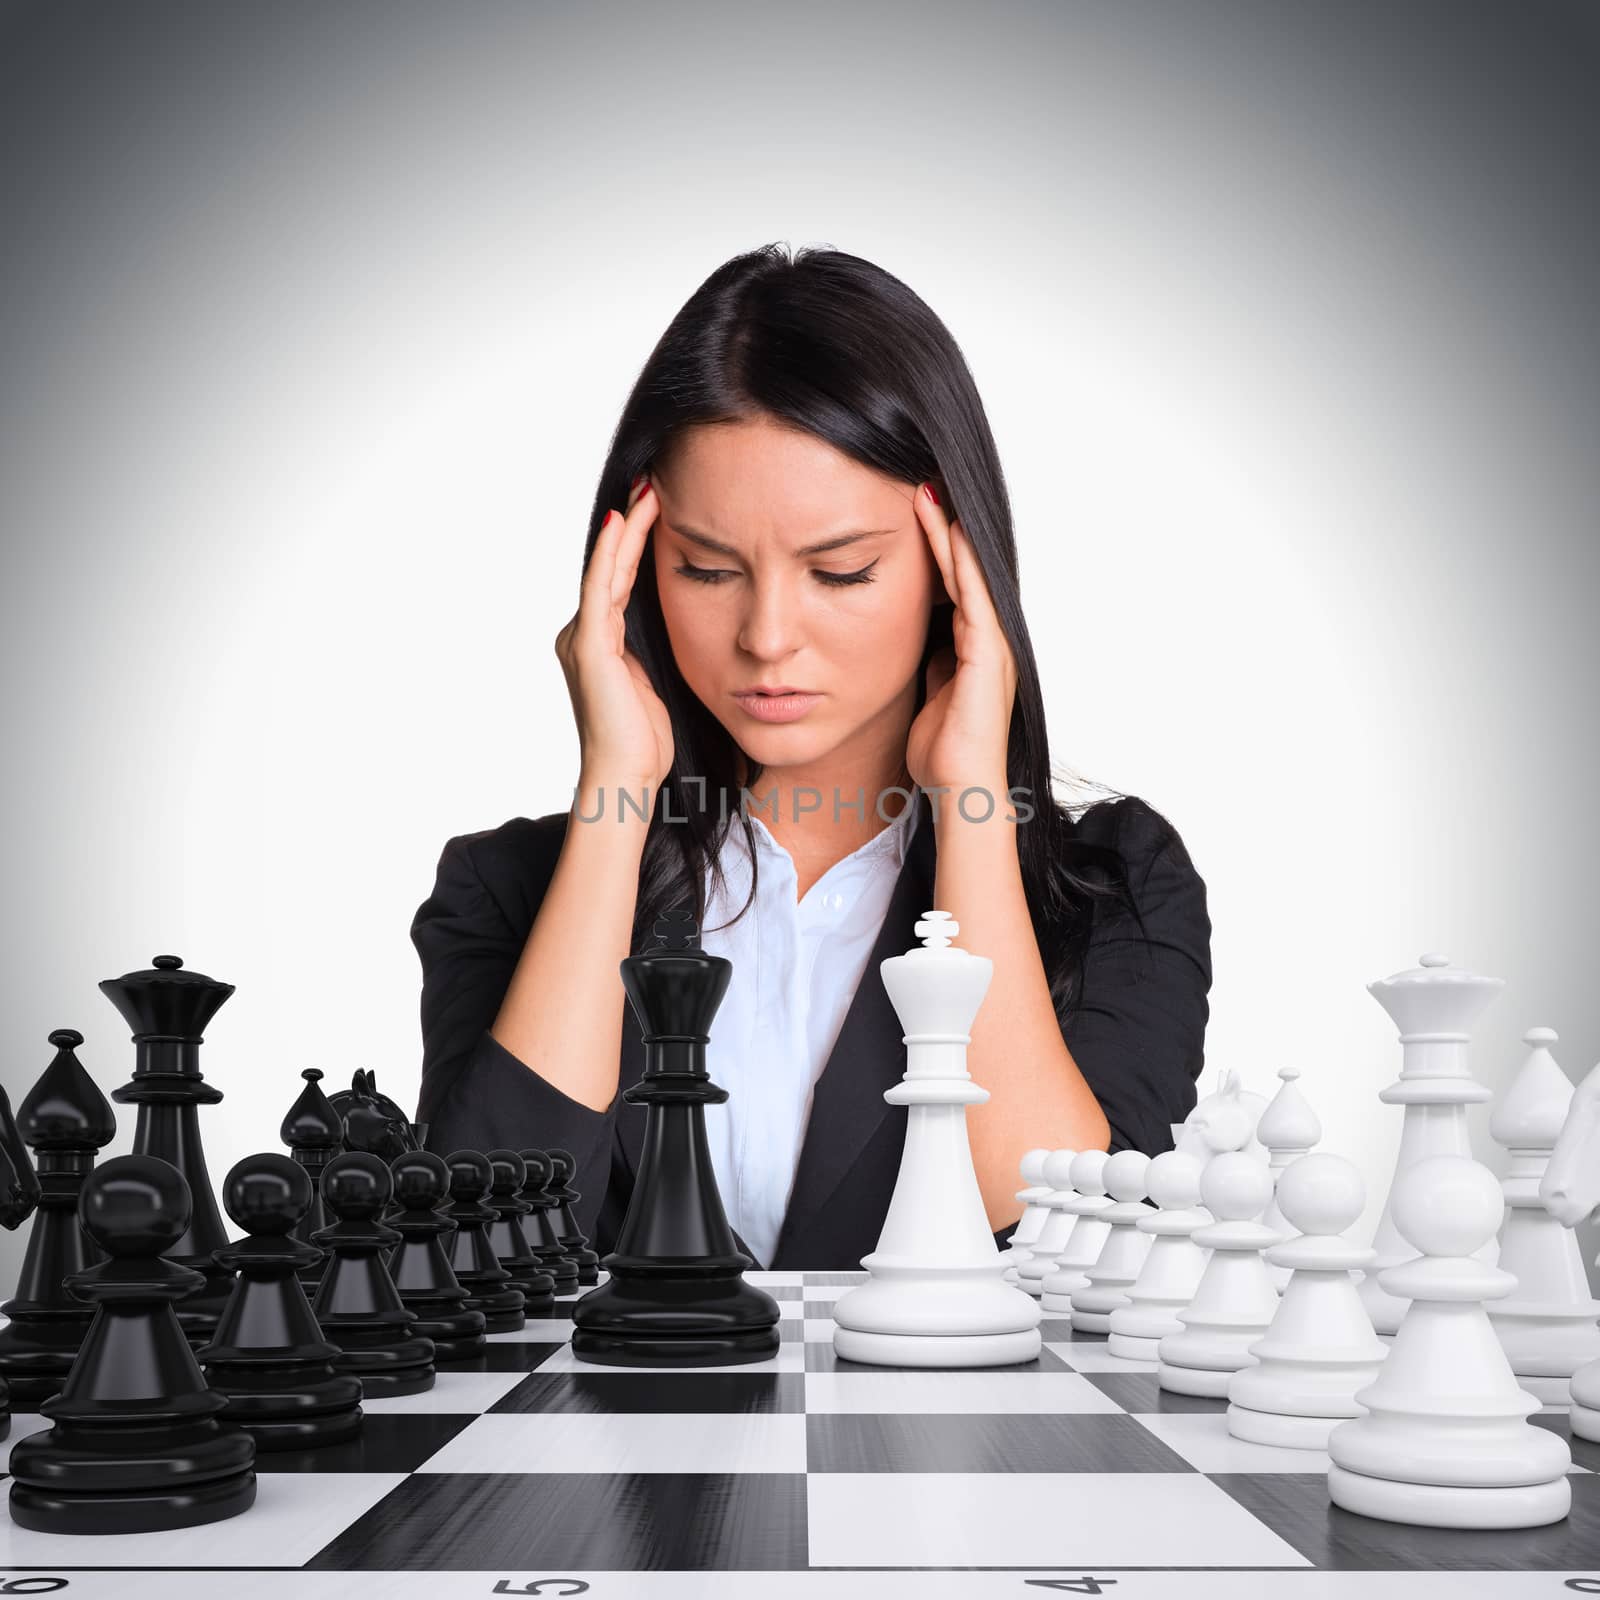 Lost in thought businesswoman looking at chess board with chess. Gray background. Business concept